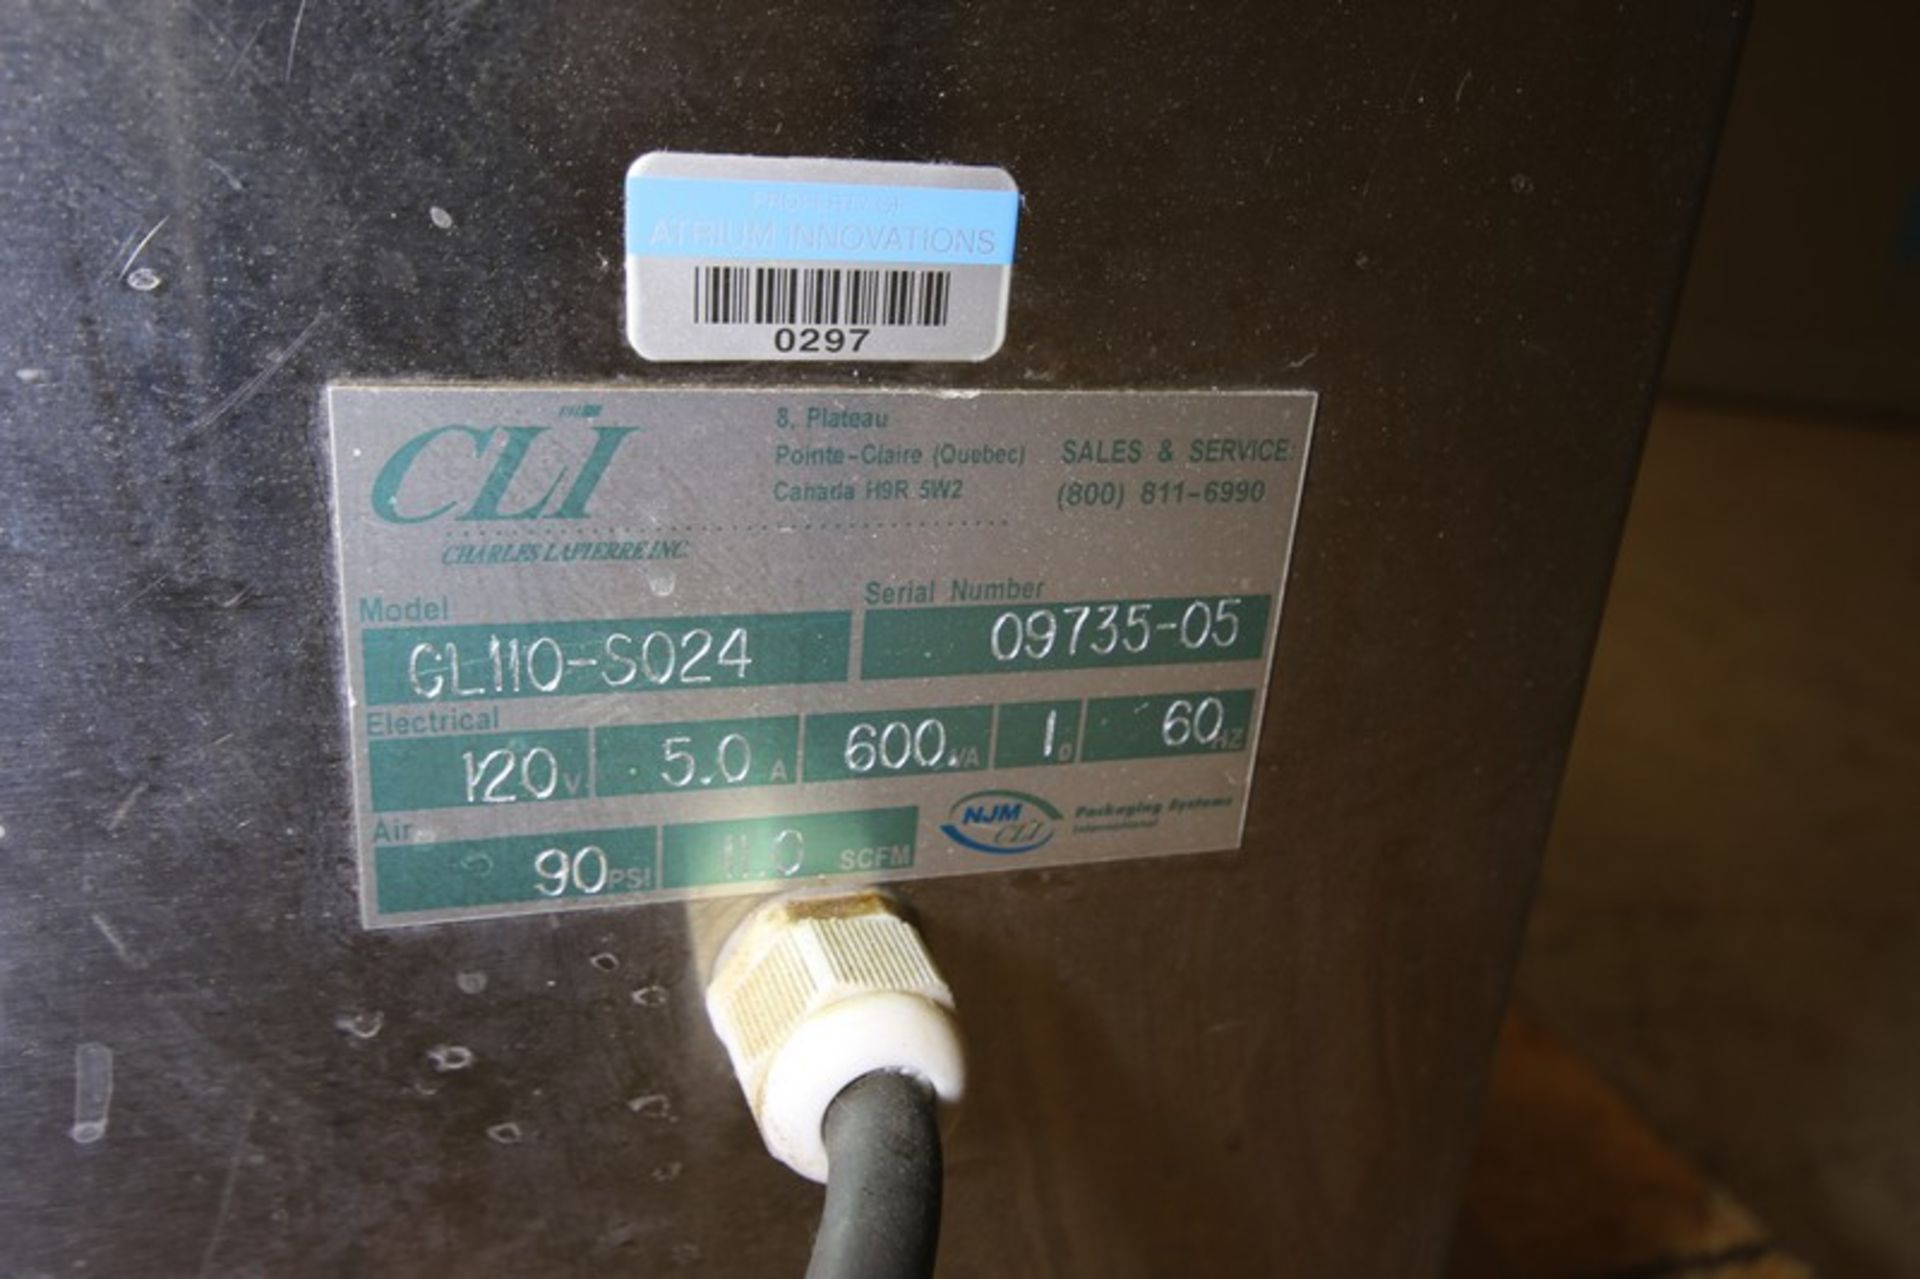 NJM / CLI S/S Fully Automatic Cottoner, Model CL-110-S024, SN 09735-05, with Siemens TD200 - Image 8 of 9